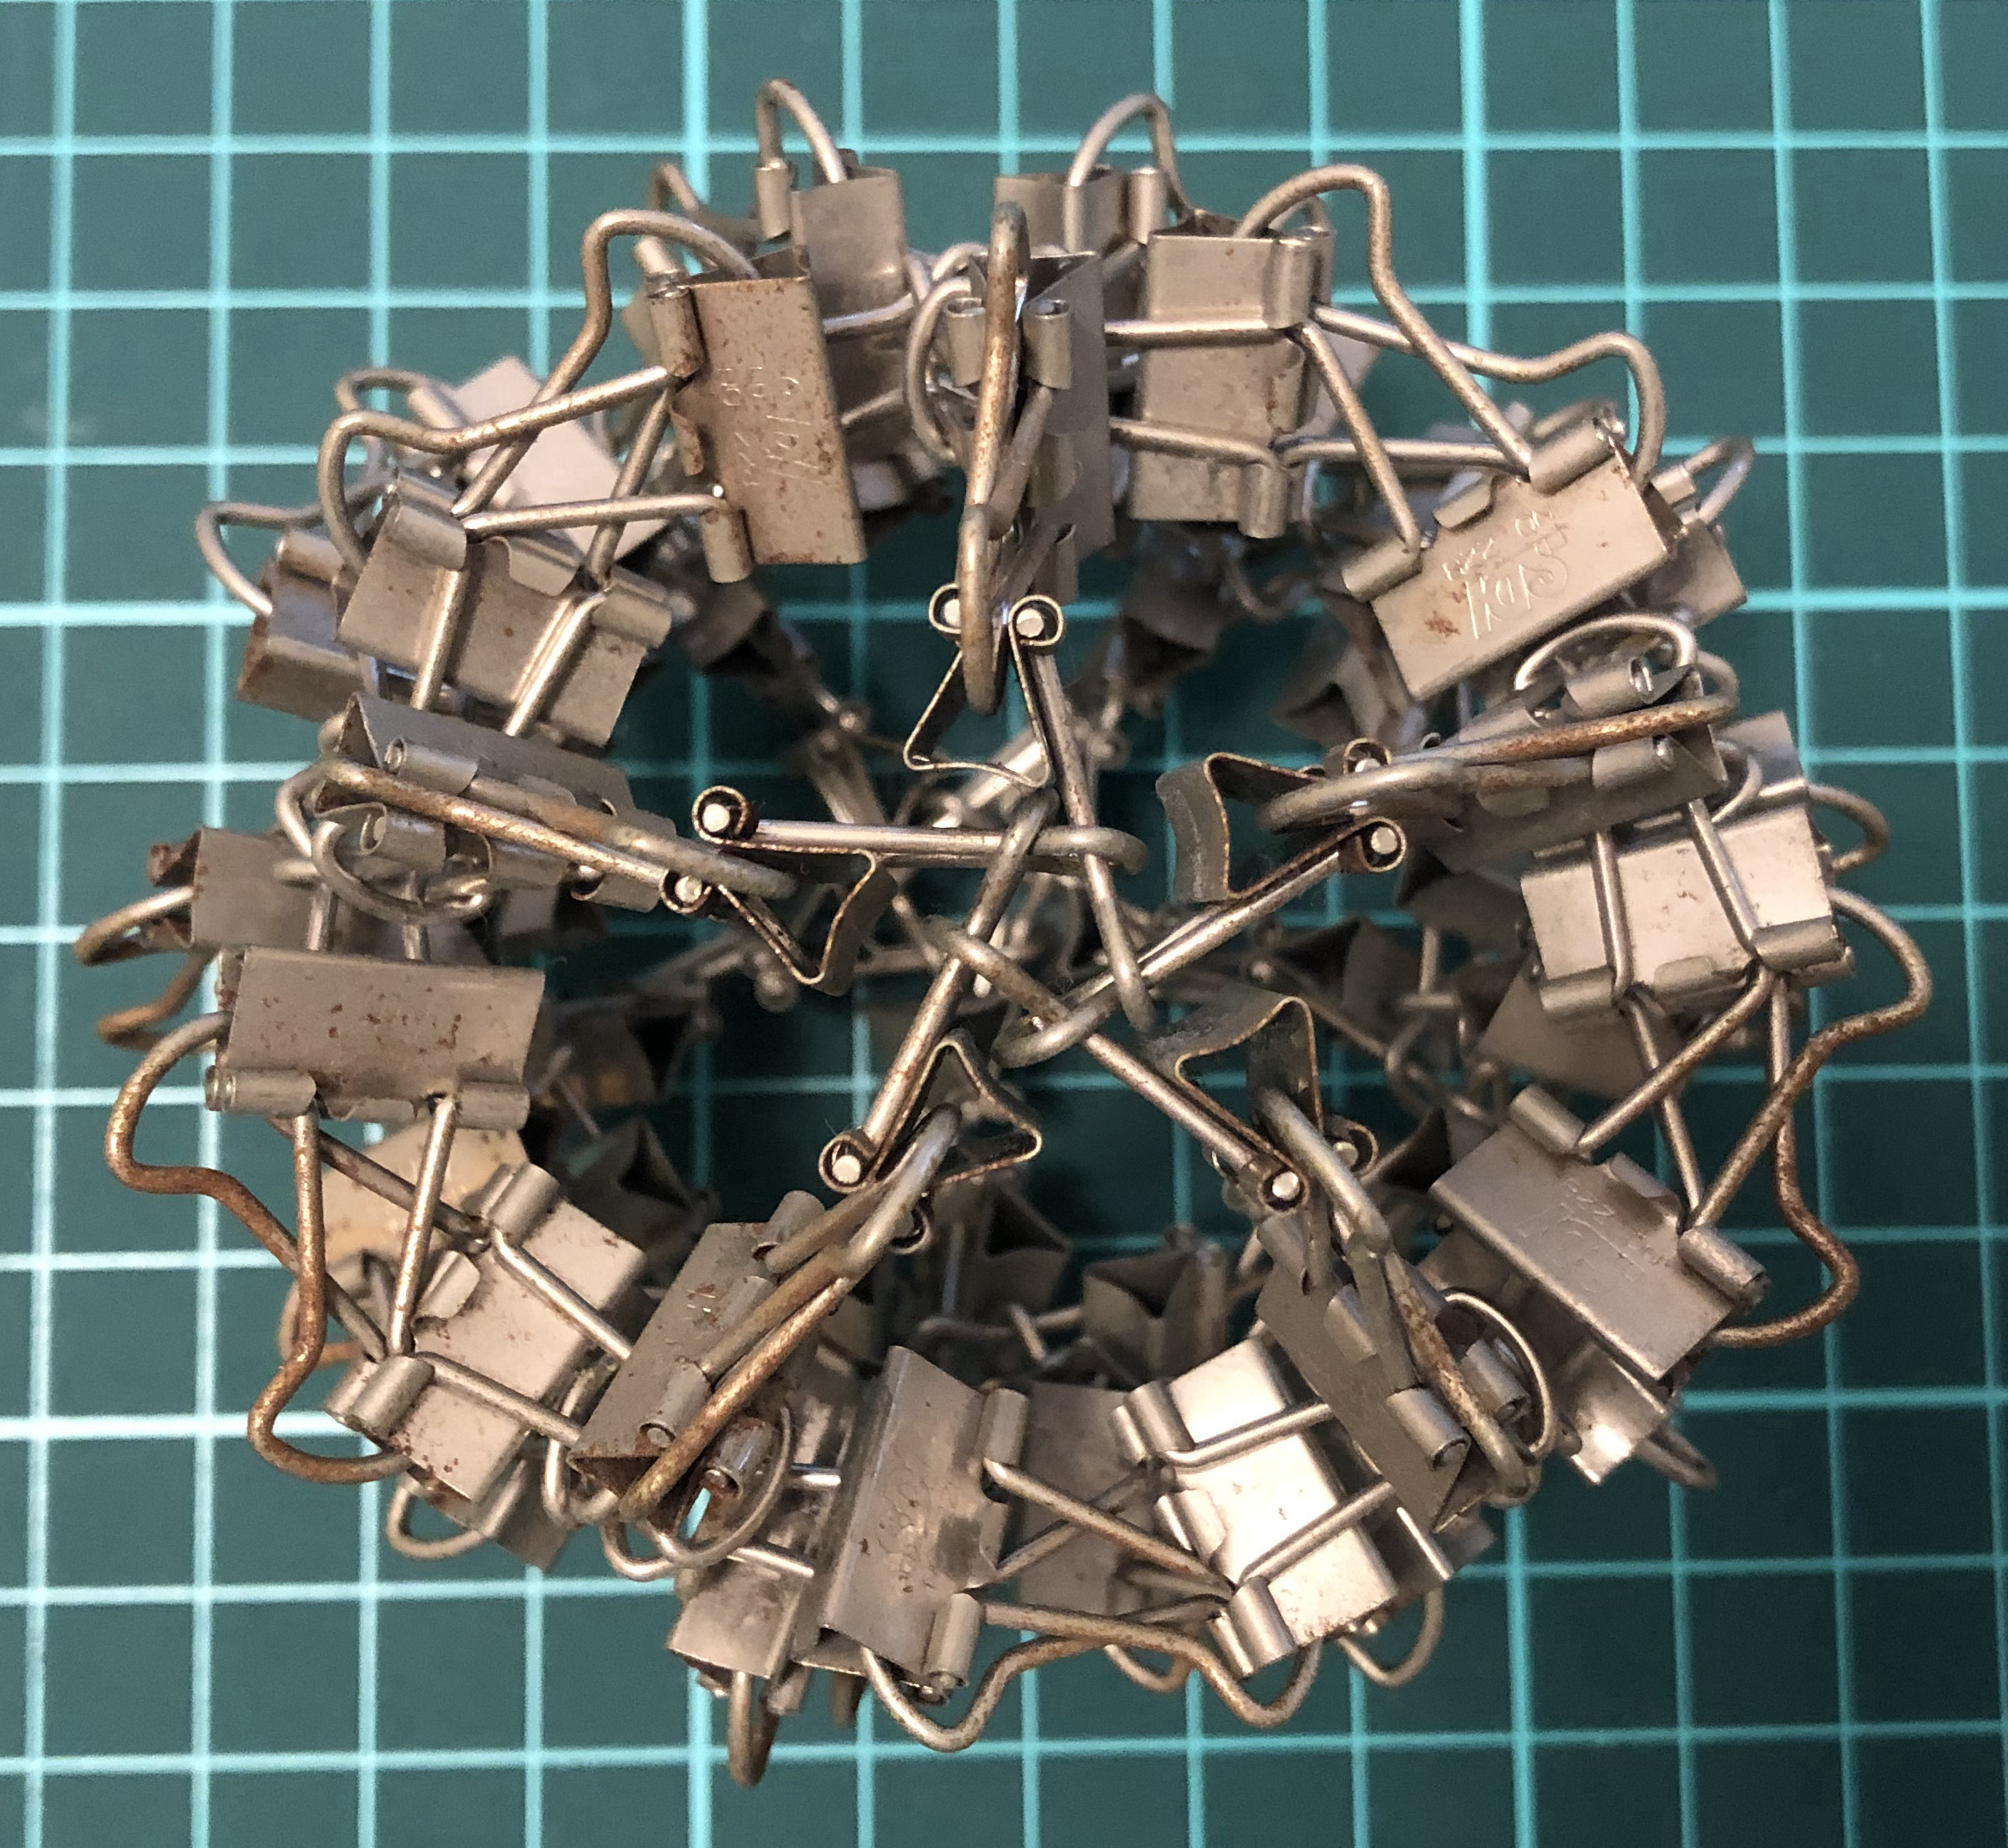 60 clips forming 12 Φ-vertices and 30 B-edges forming Icosahedron